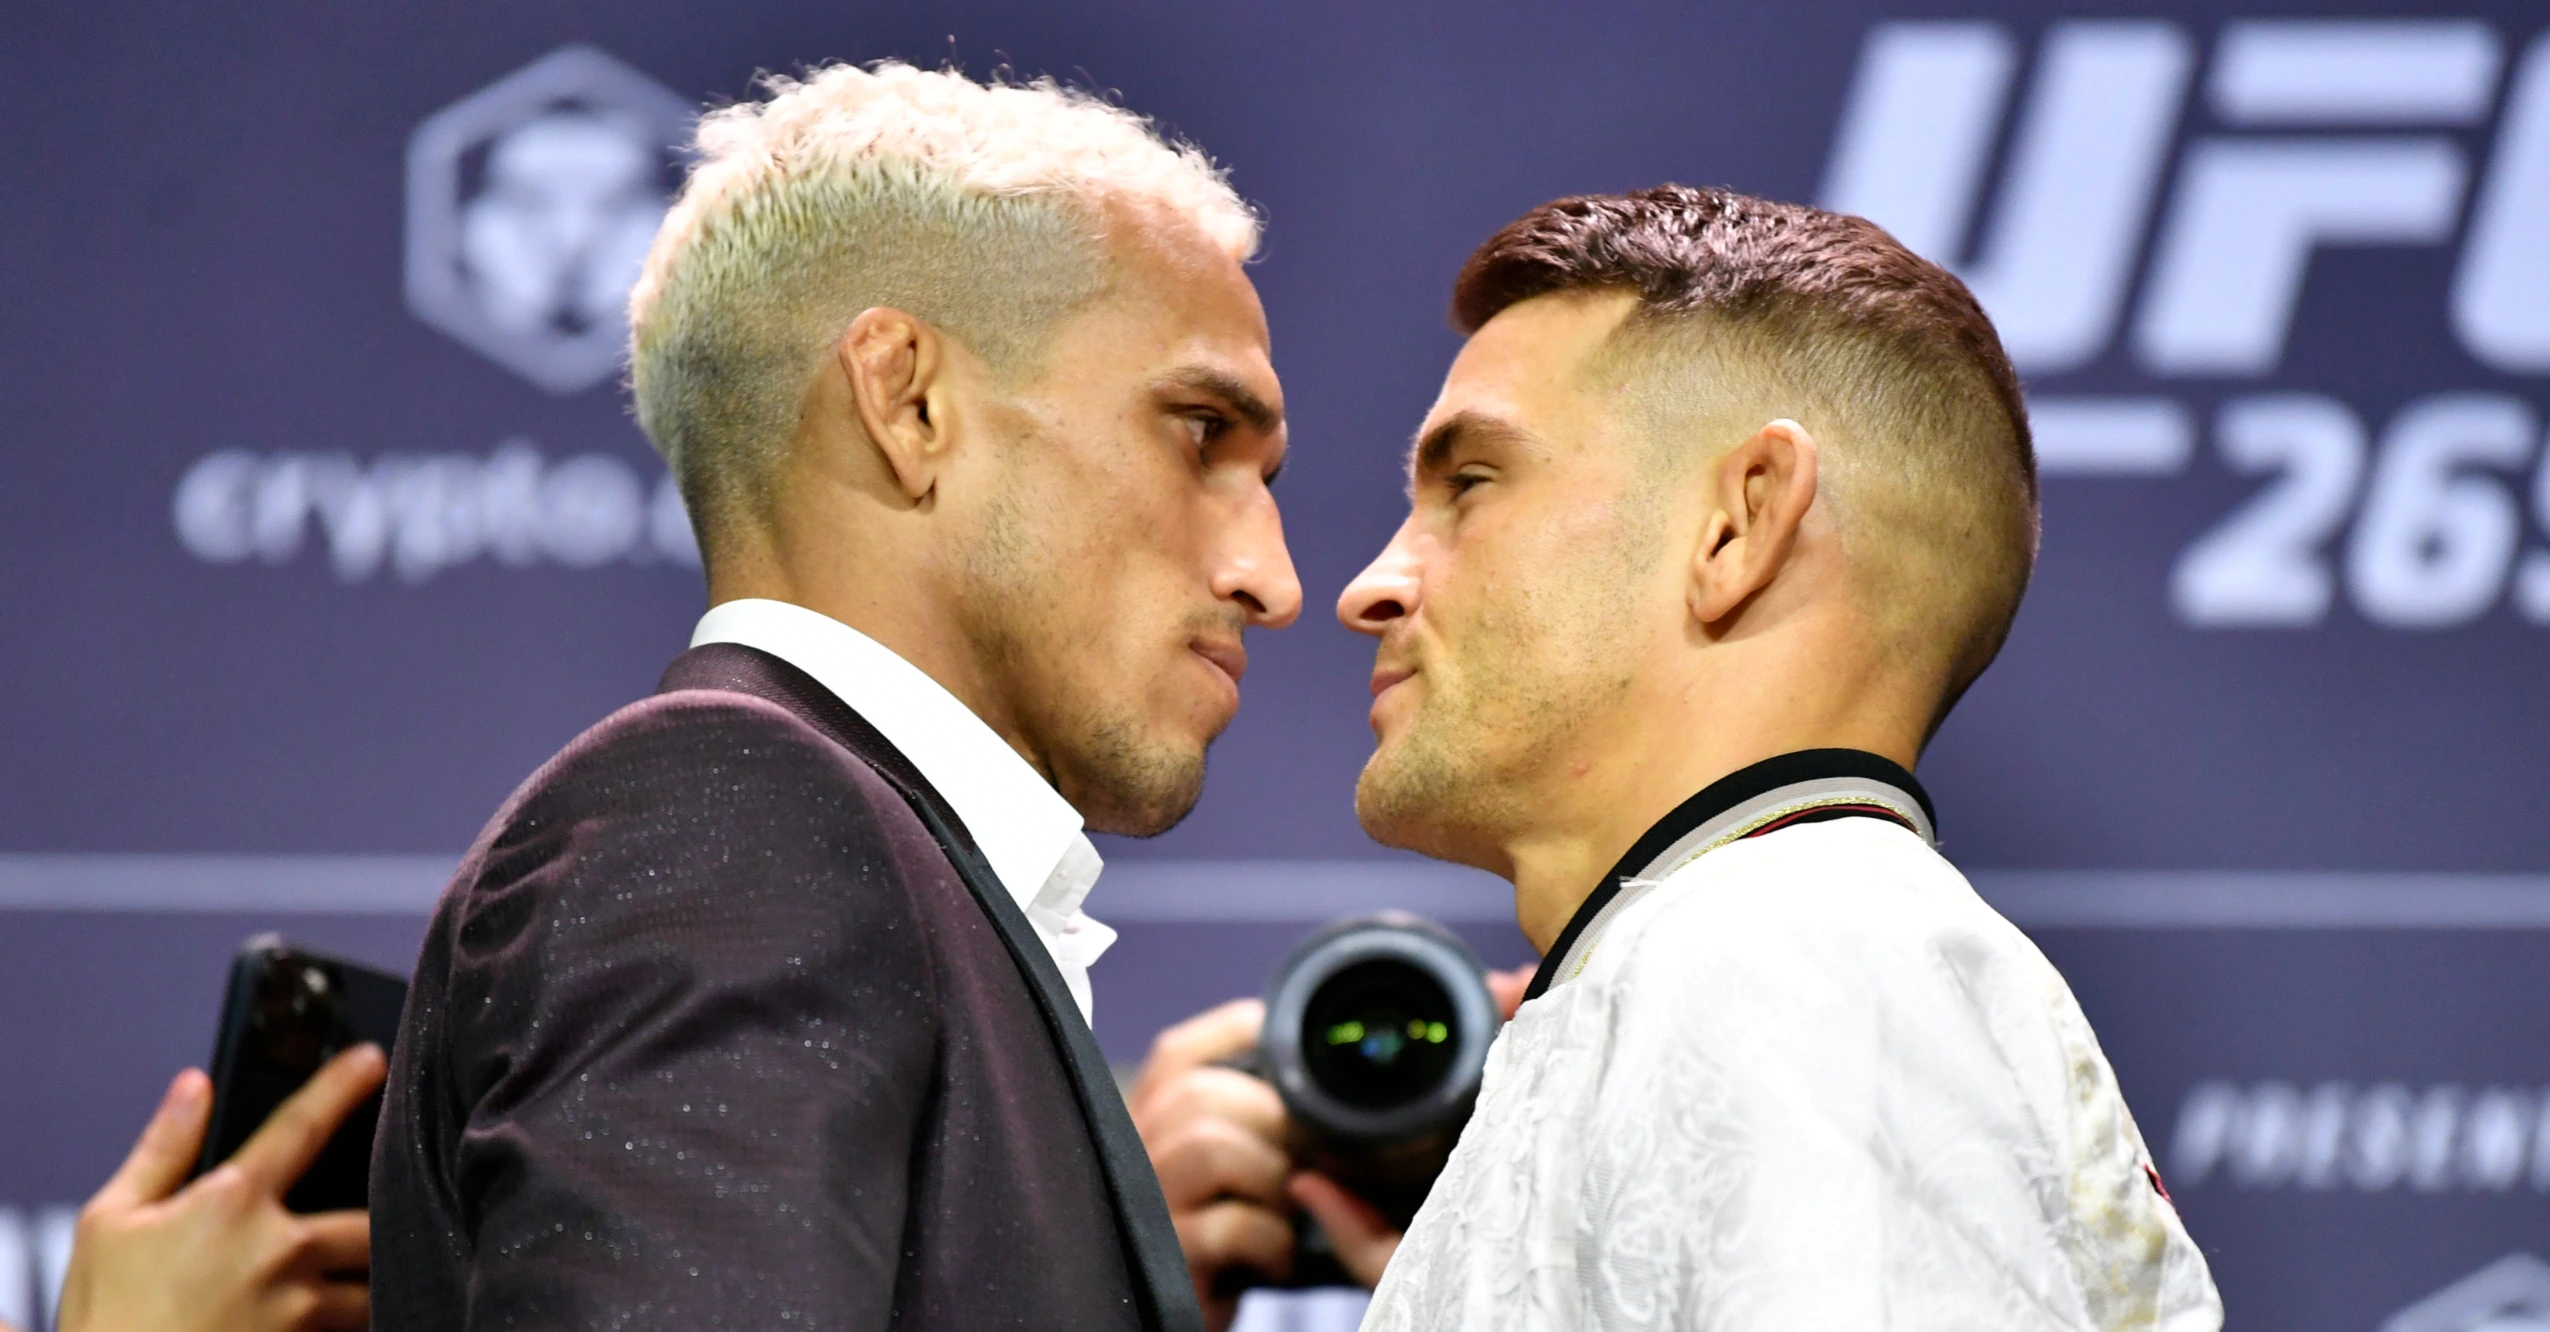 UFC 269: Charles Oliveira vs. Dustin Poirier Betting Preview, How To Watch, Start Time, Best Prop Bets